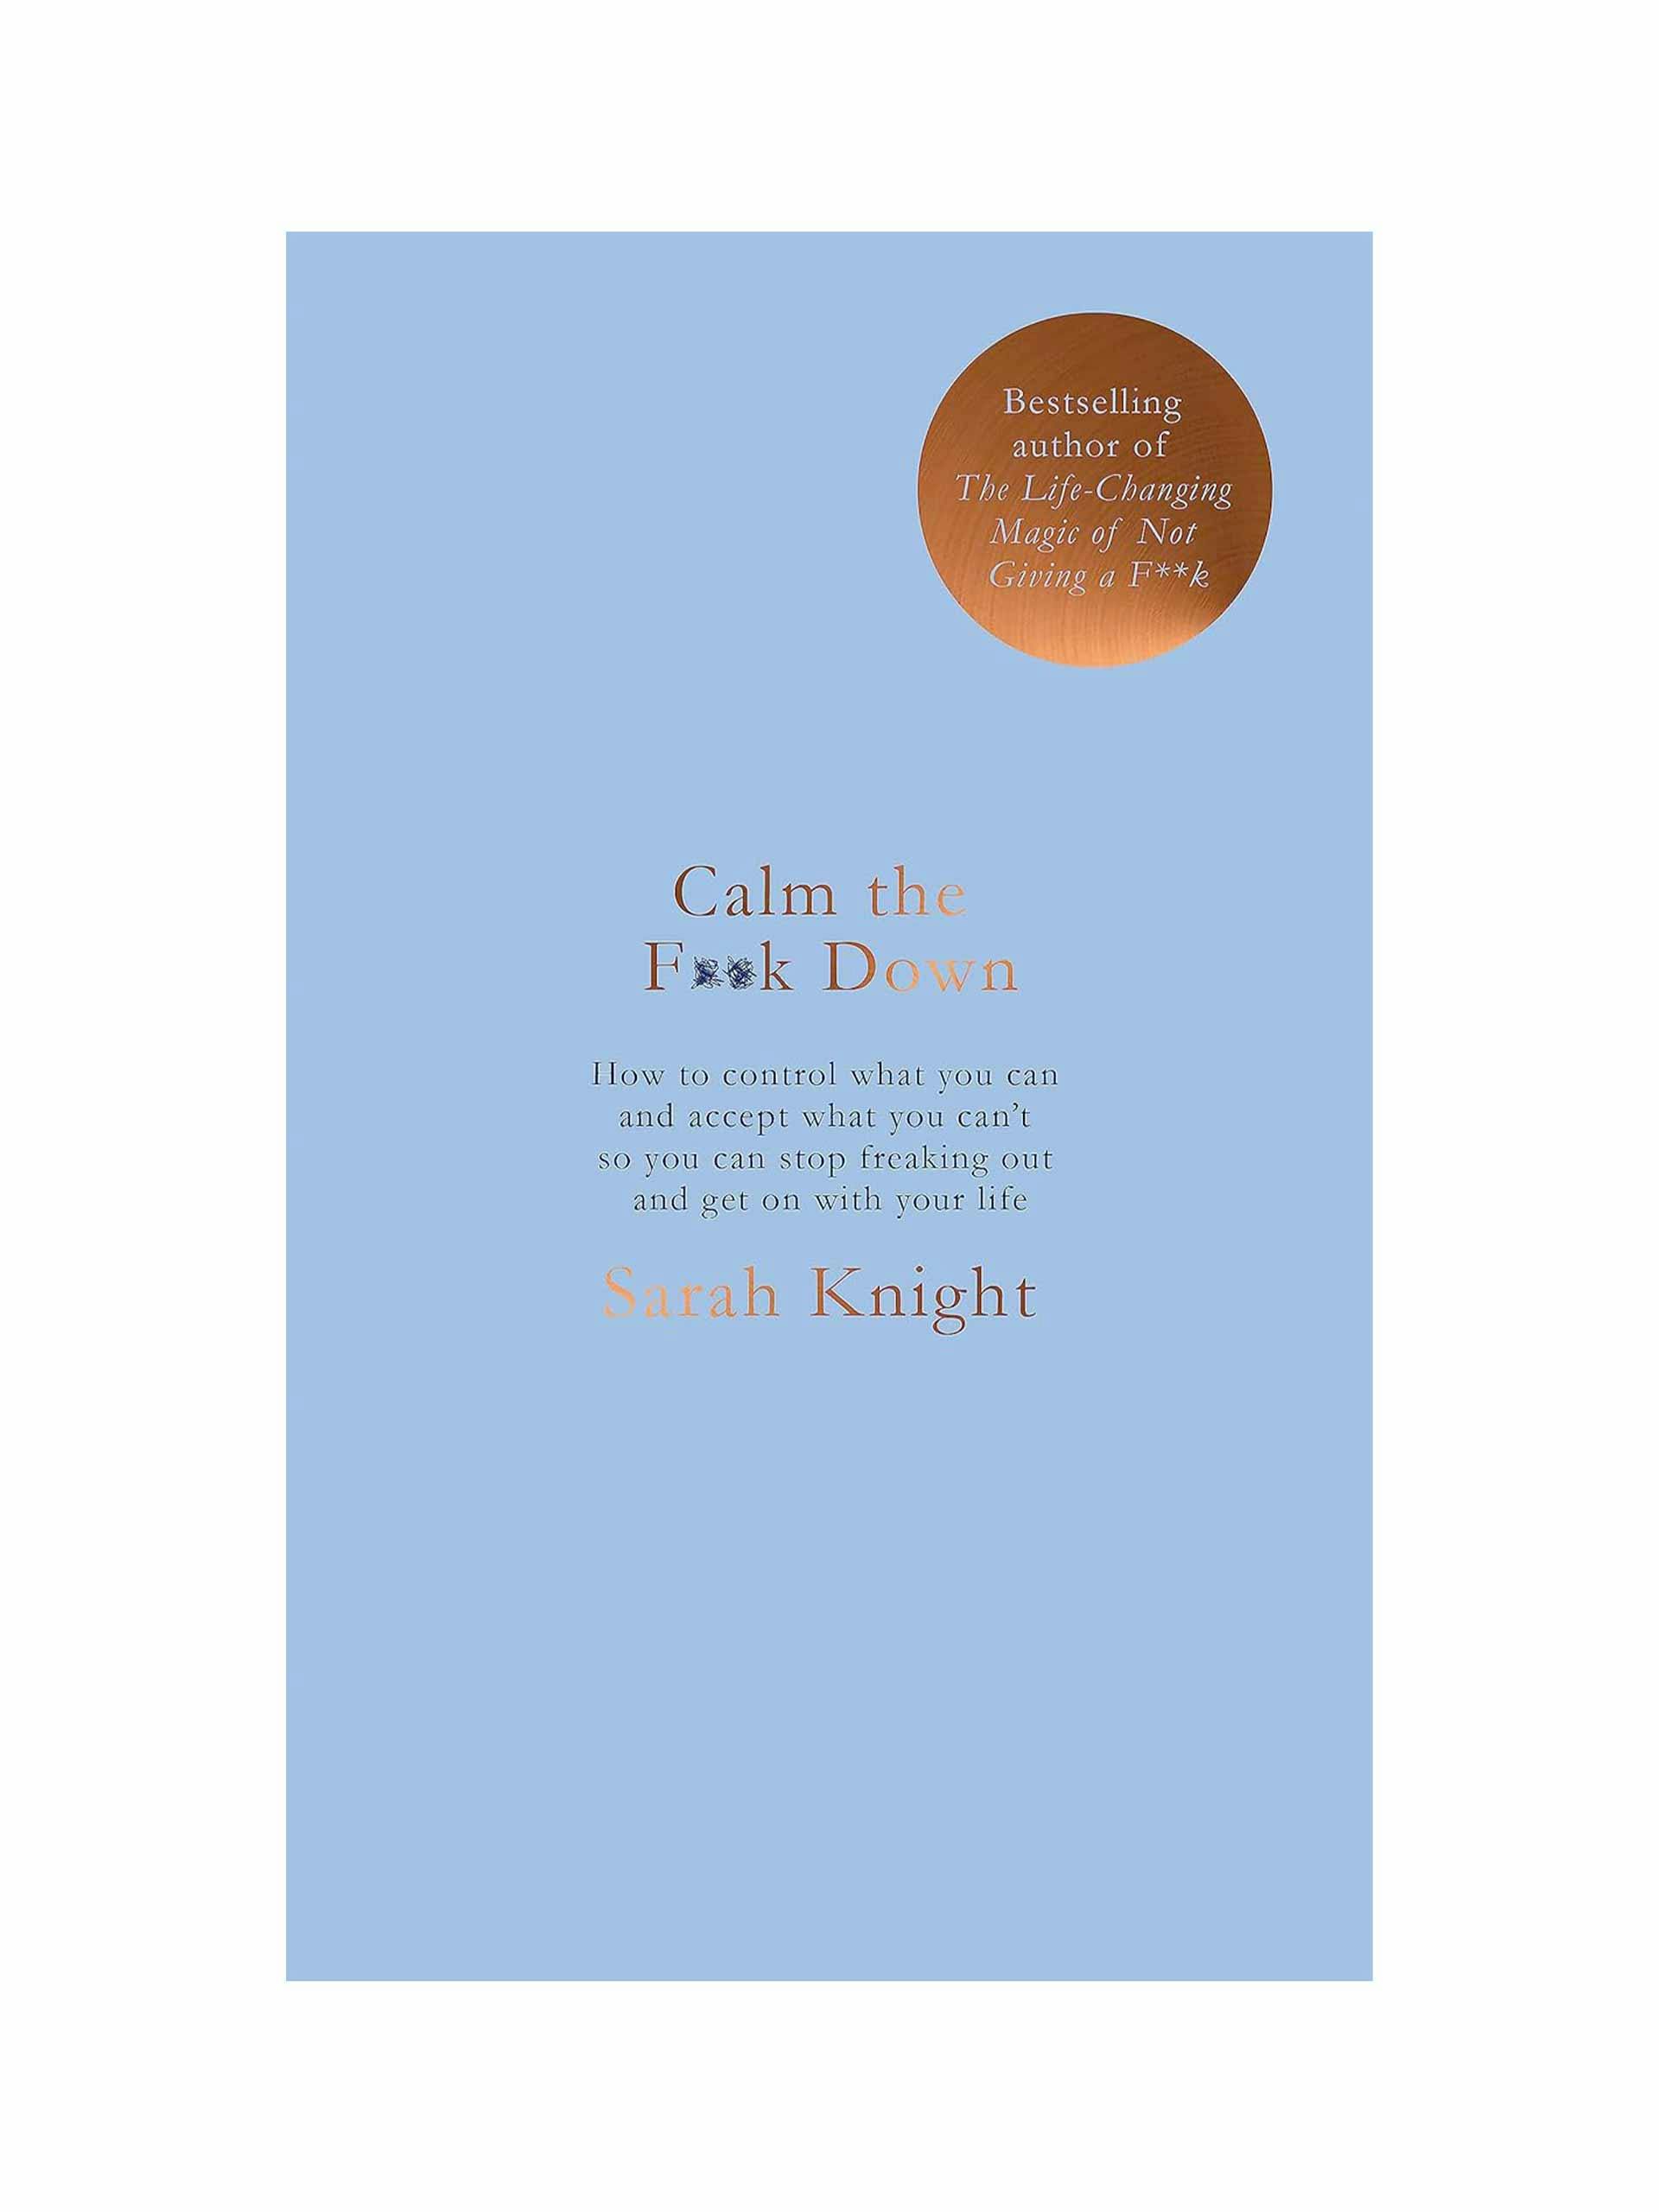 Self-care guide by Sarah Knight